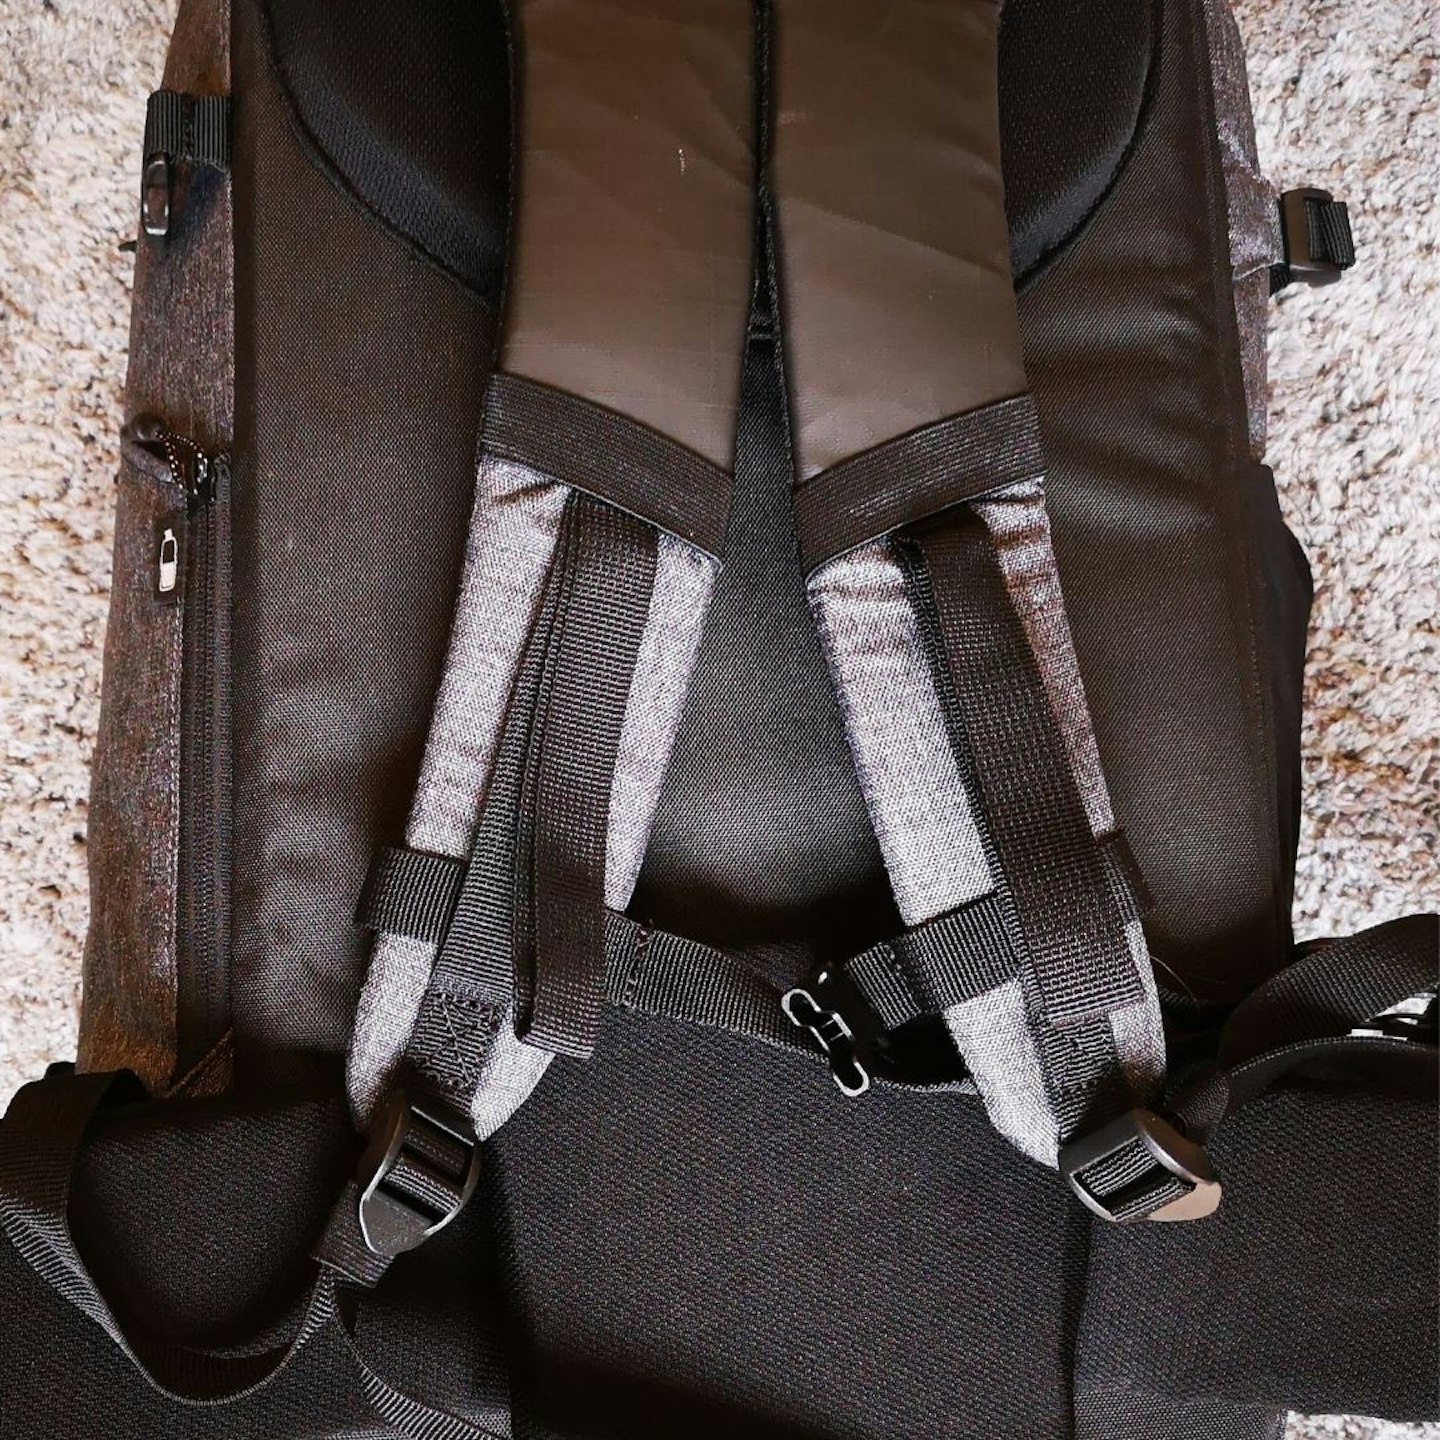 Forclaz strap system with sternum strap